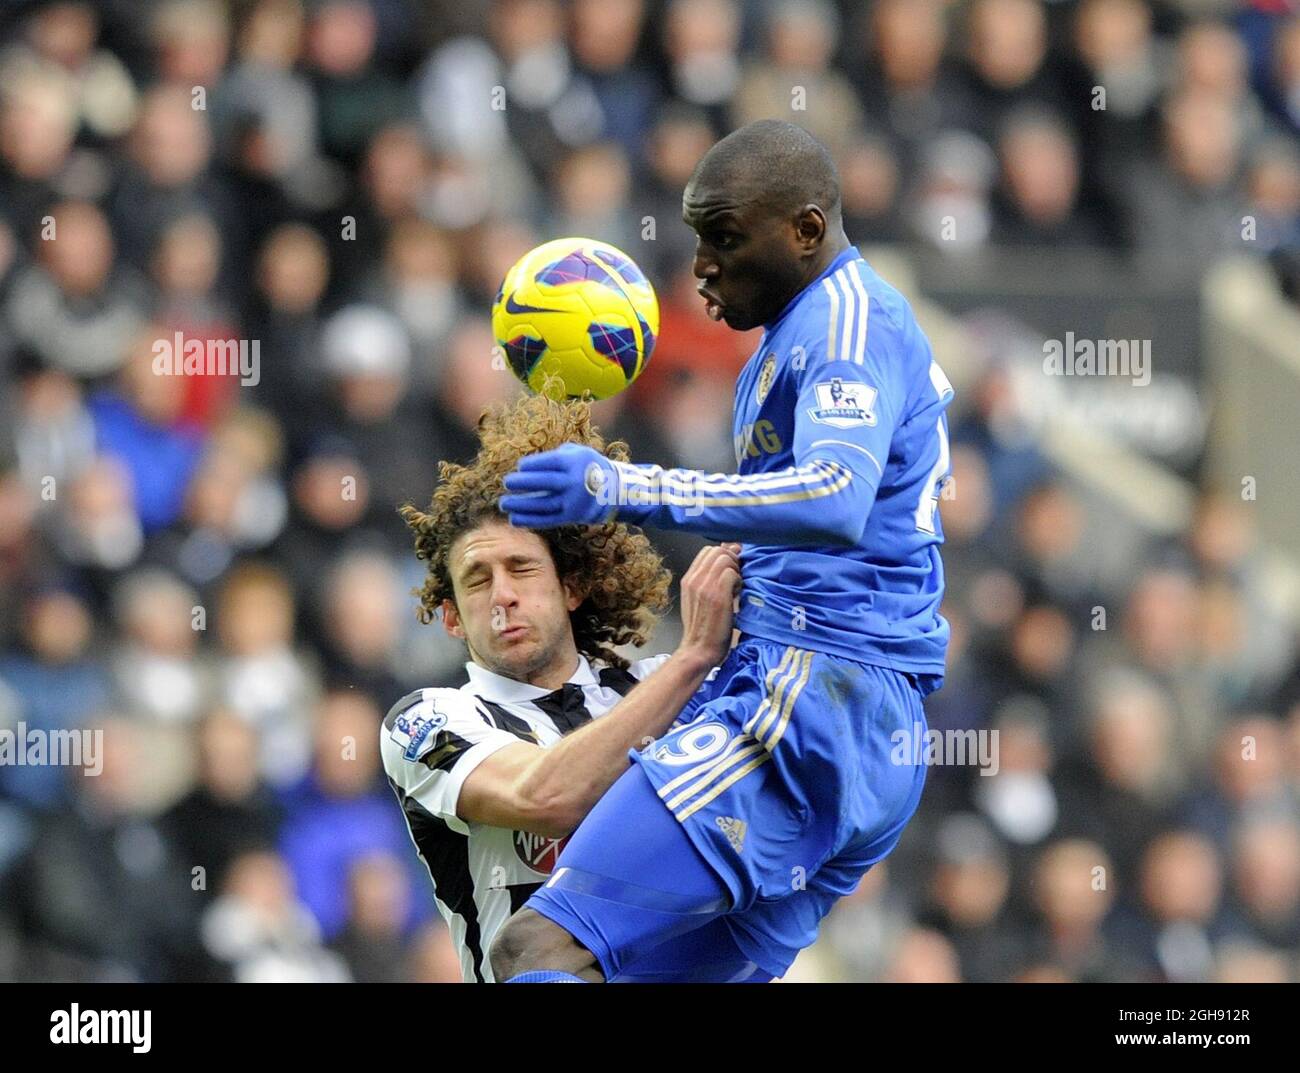 Fabricio Coloccini of Newcastle United (L) and Demba Ba of Chelsea during the Barclays Premier League soccer match between Newcastle Utd and Chelsea at St. James' Park in Newcastle, United Kingdom on February 02, 2013. Stock Photo